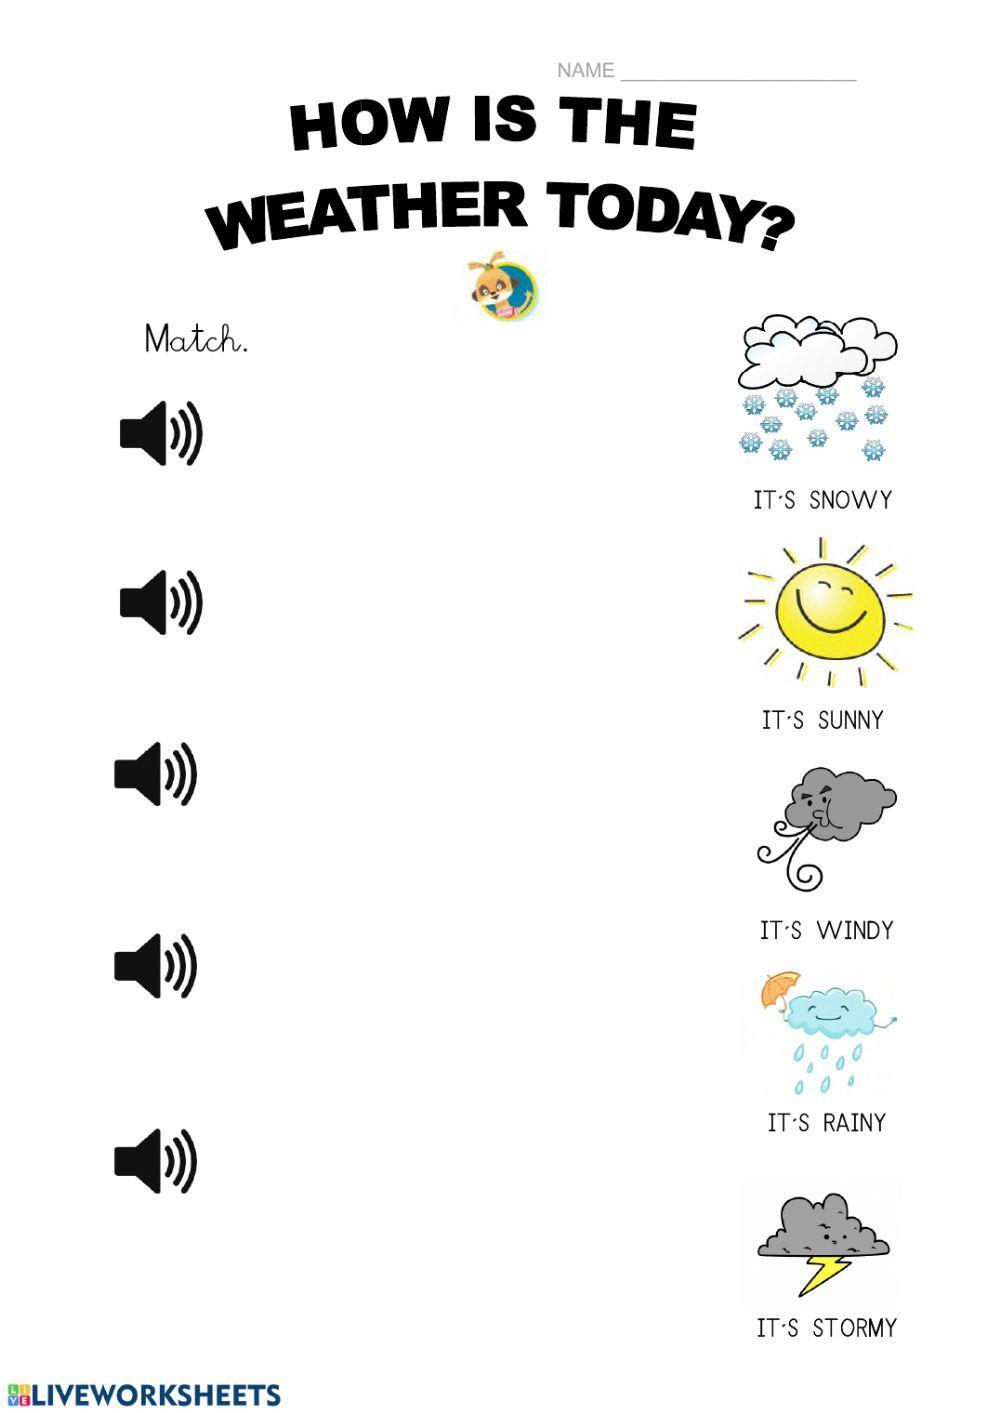 How-s the weather today?